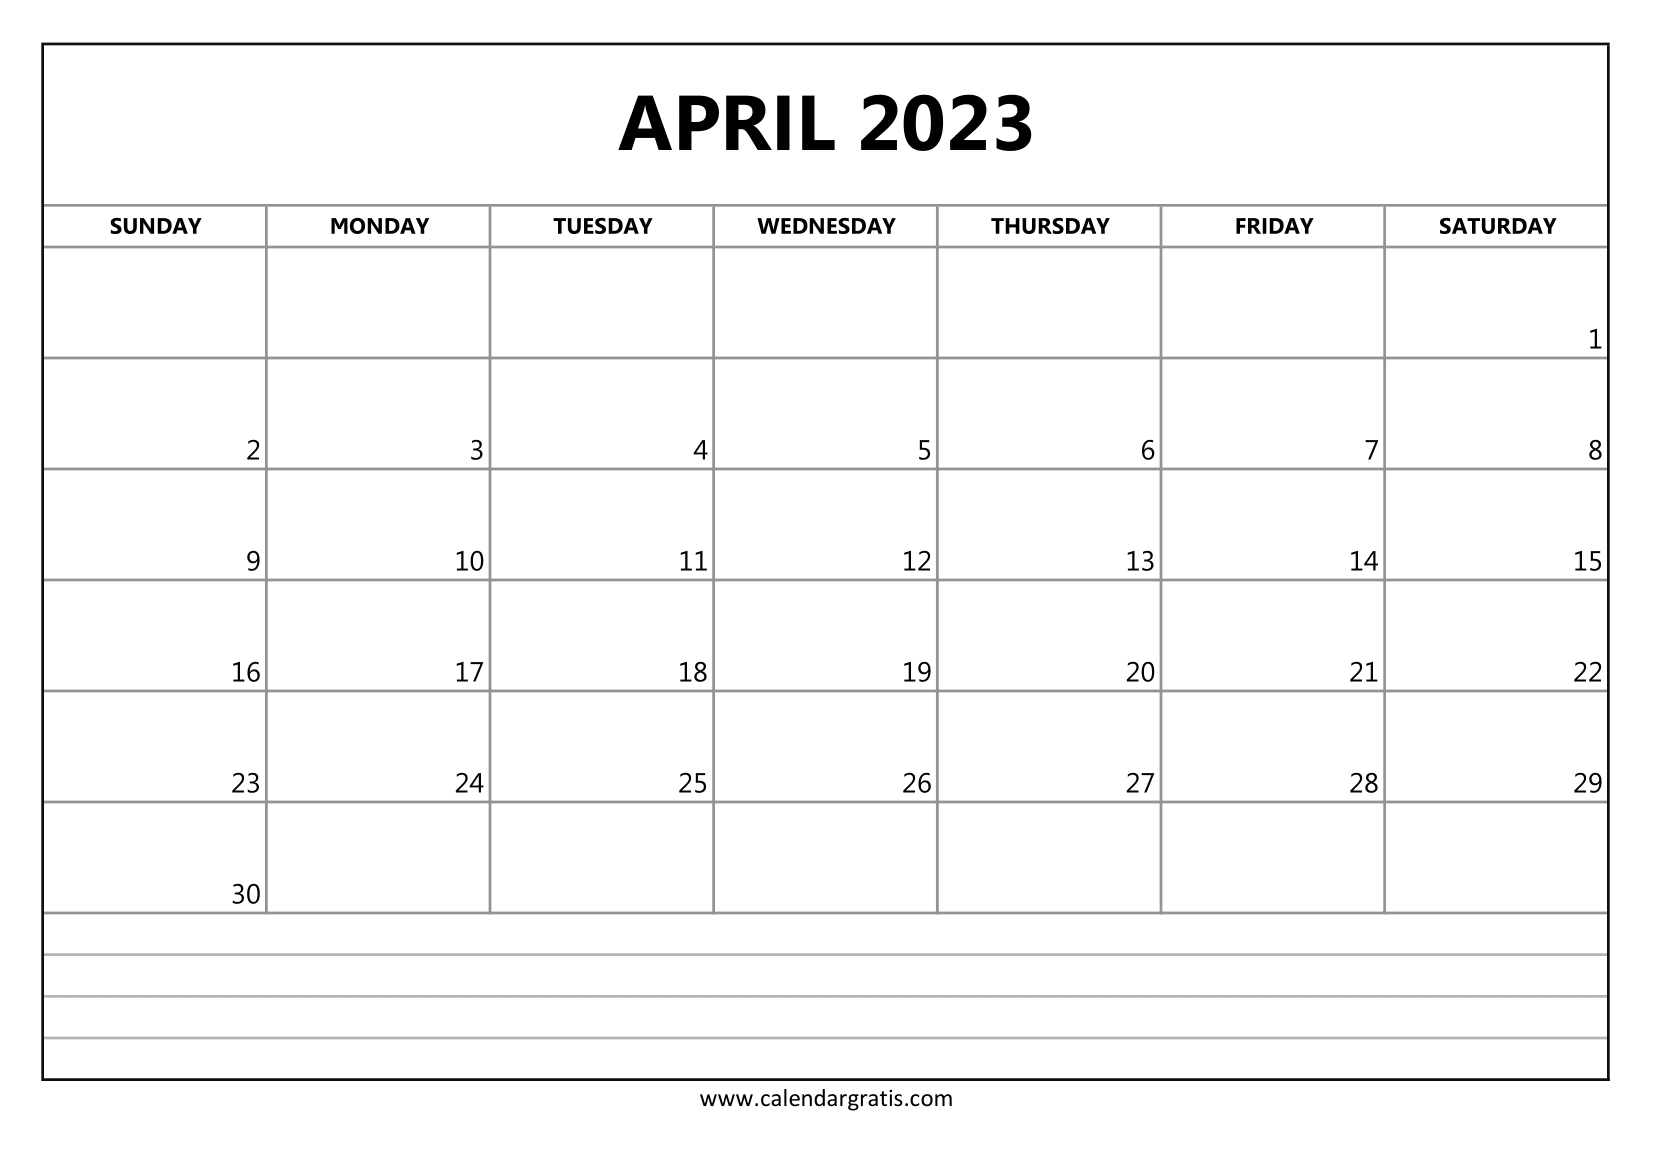 Download Free April 2023 calendar printable with notes and lines for students, teachers, office, and business.